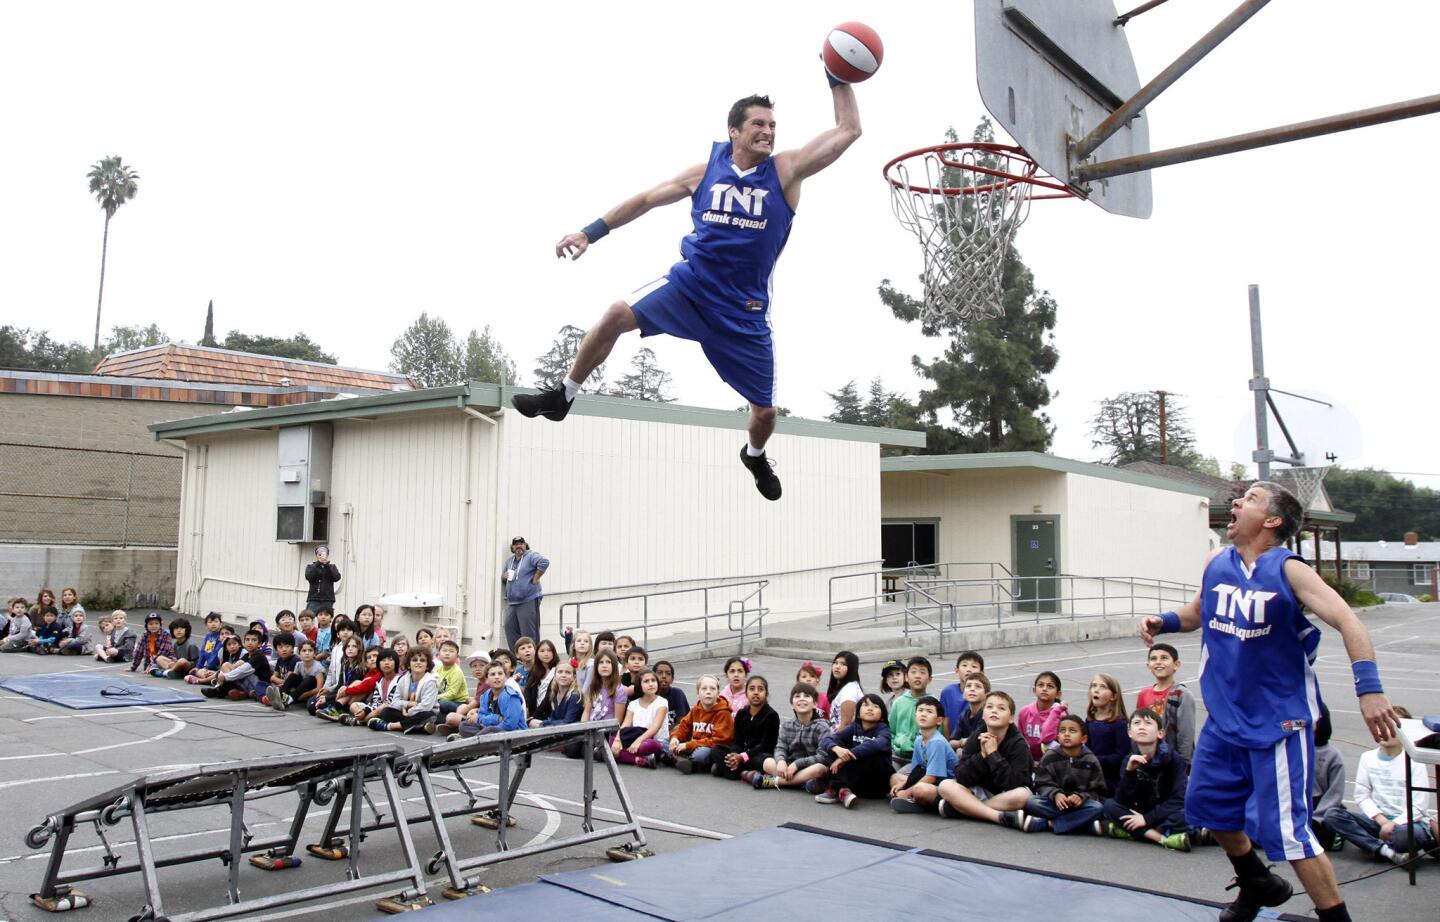 Keith Cousino of the TNT Dunk Squad goes up in the sky for a dunk as partner Brian Smith, right, looks on along with La Canada Elementary School kindergarten through 3rd grade students at the school playground in La Canada Flintridge on Tuesday, March 25, 2014.